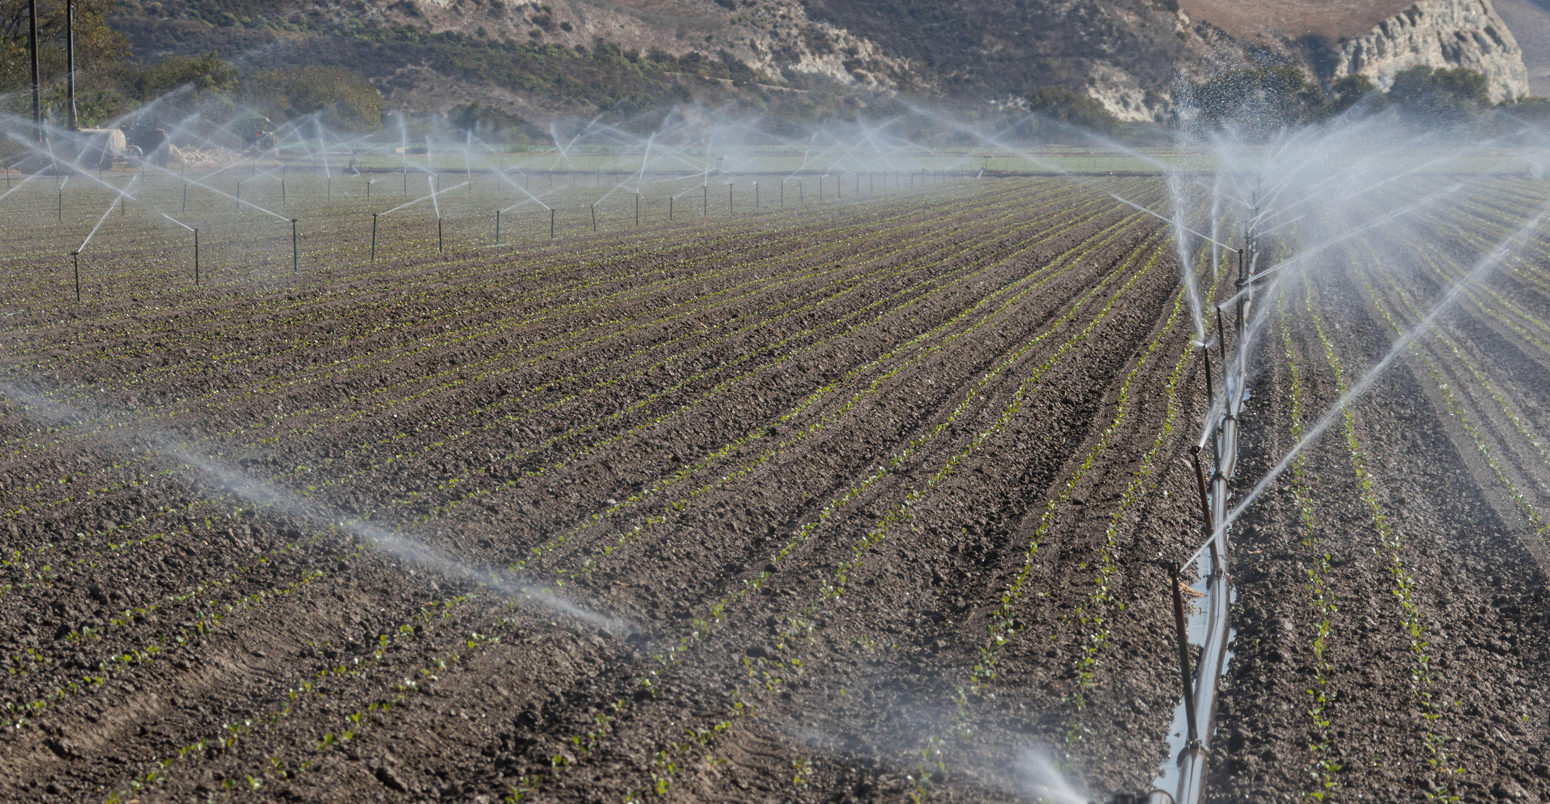 Rows-of-sprinklers-irrigate-newly-sown-and-planted-soybeans-in-a-field-in-California